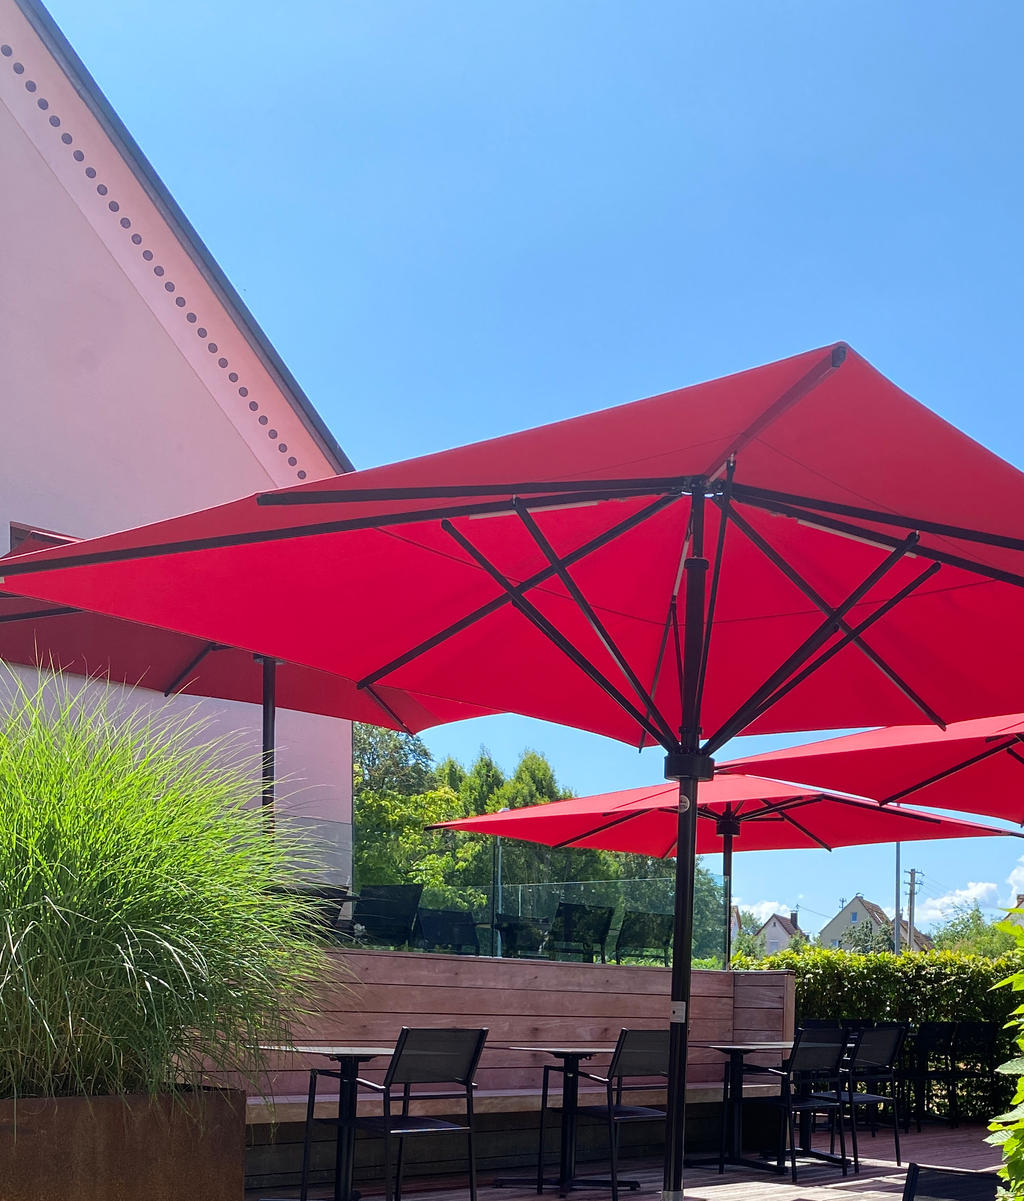 Terrace with red parasols